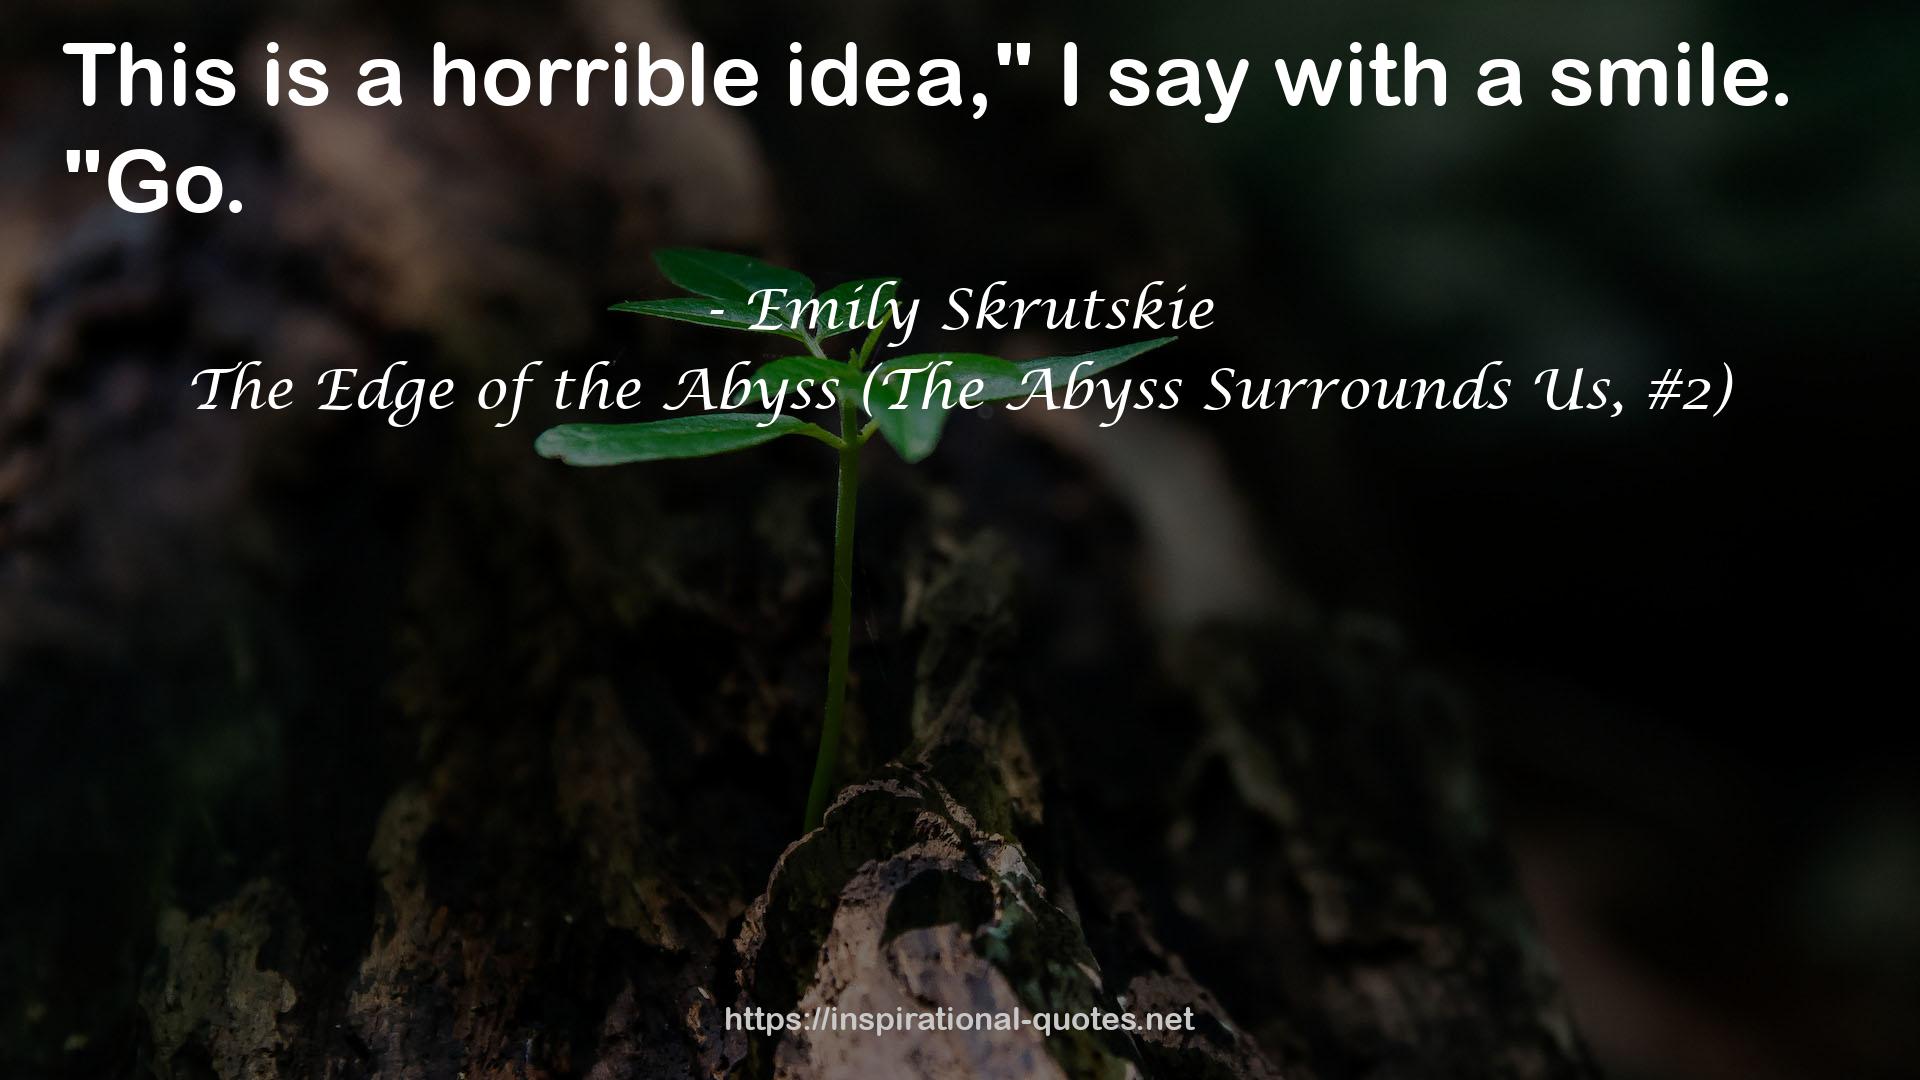 The Edge of the Abyss (The Abyss Surrounds Us, #2) QUOTES